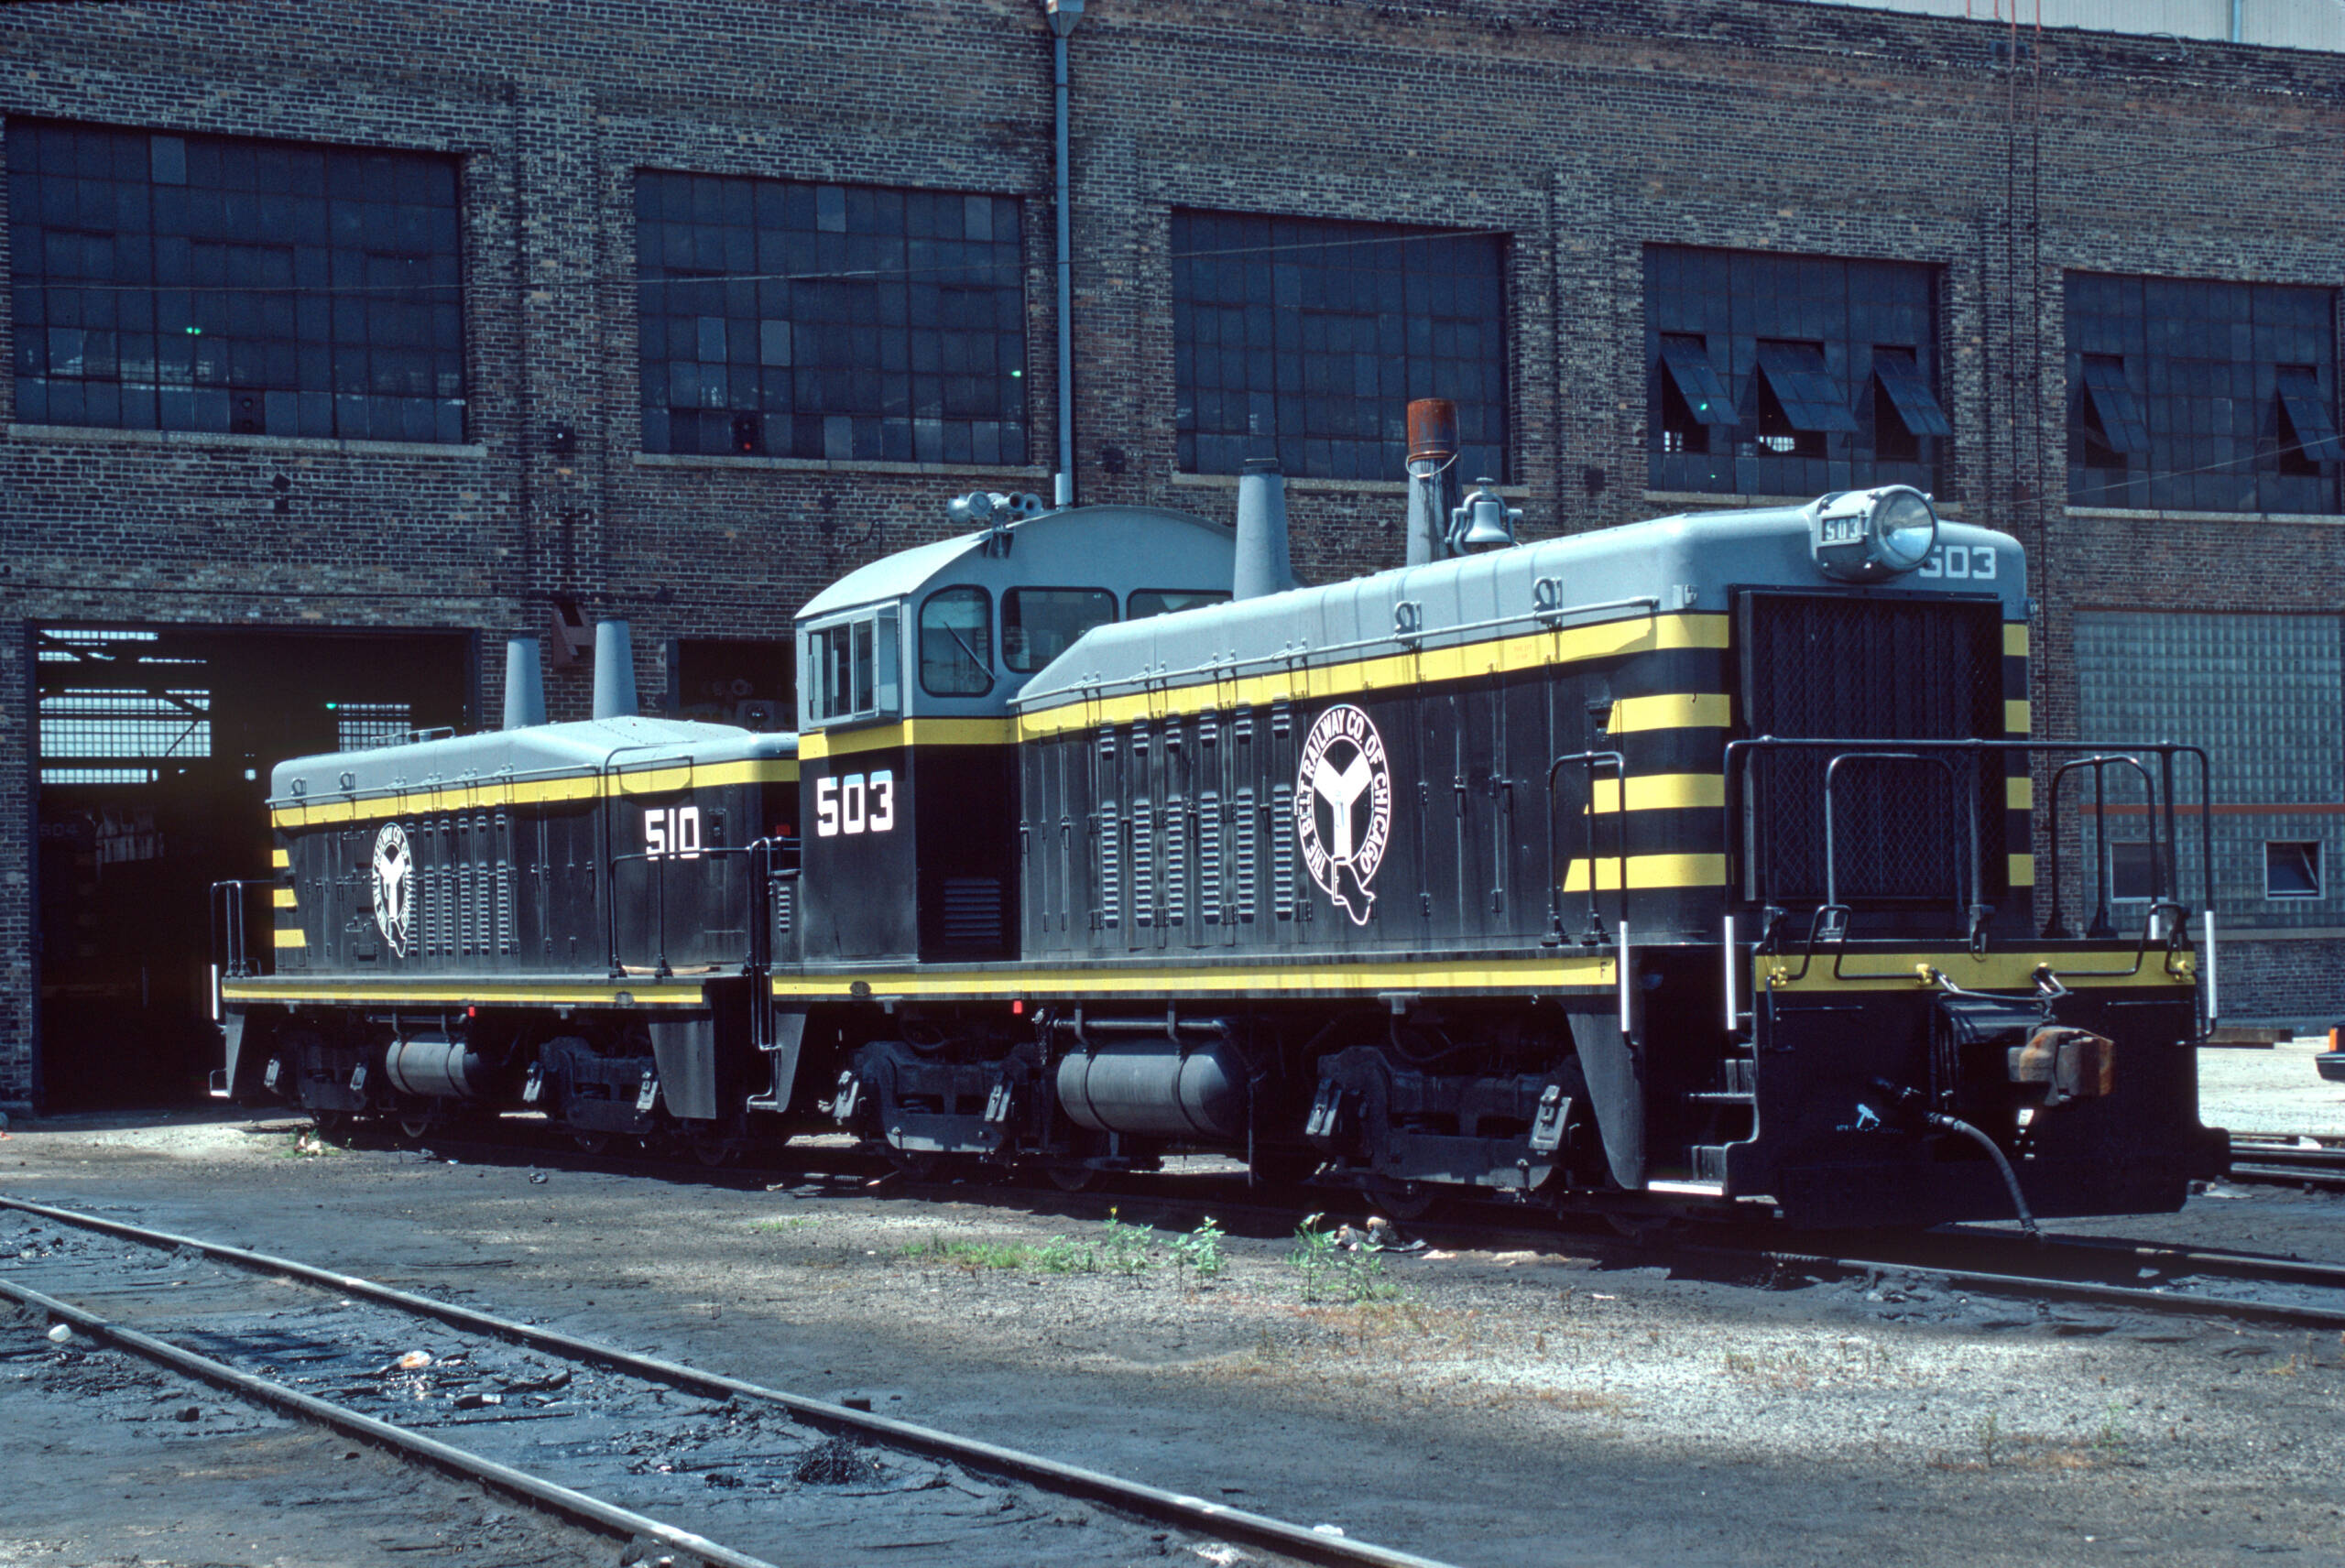 black and silver with yellow stripes on locomotive